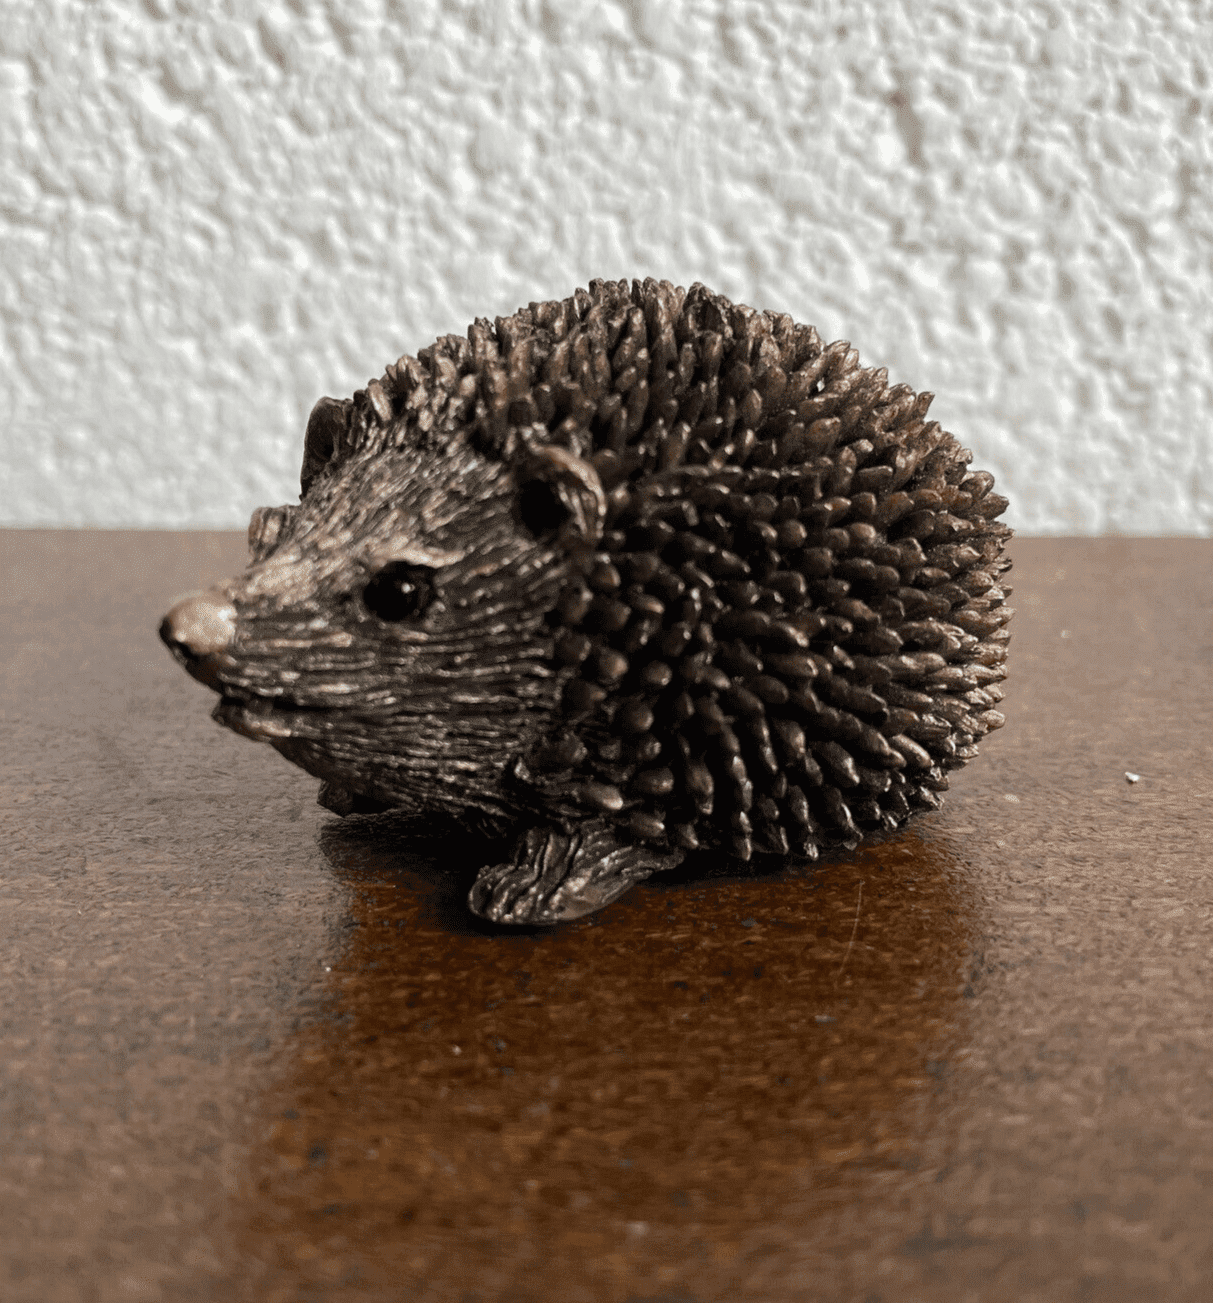 Frith - Prickly Baby Hoglet Hedgehog Sculpture By Thomas Meadows